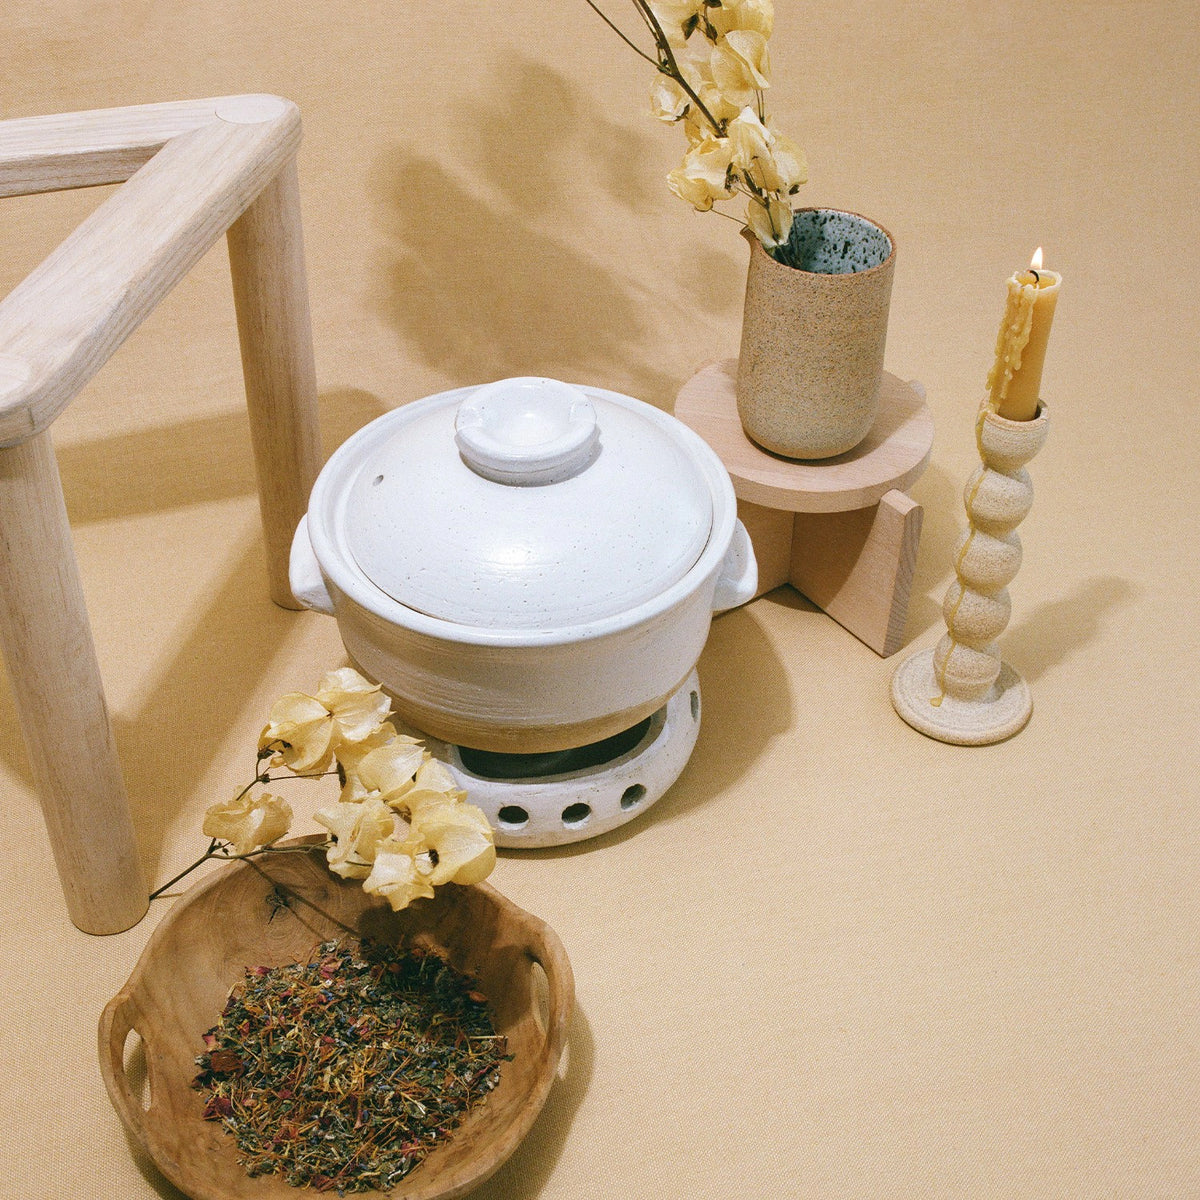 A cozy still life setup featuring THE FULLEST&#39;s Womb Protector Ritual Bundle on a warmer, a wooden bowl of dried herbs, a candle, and a vase with dried flowers on a beige surface.